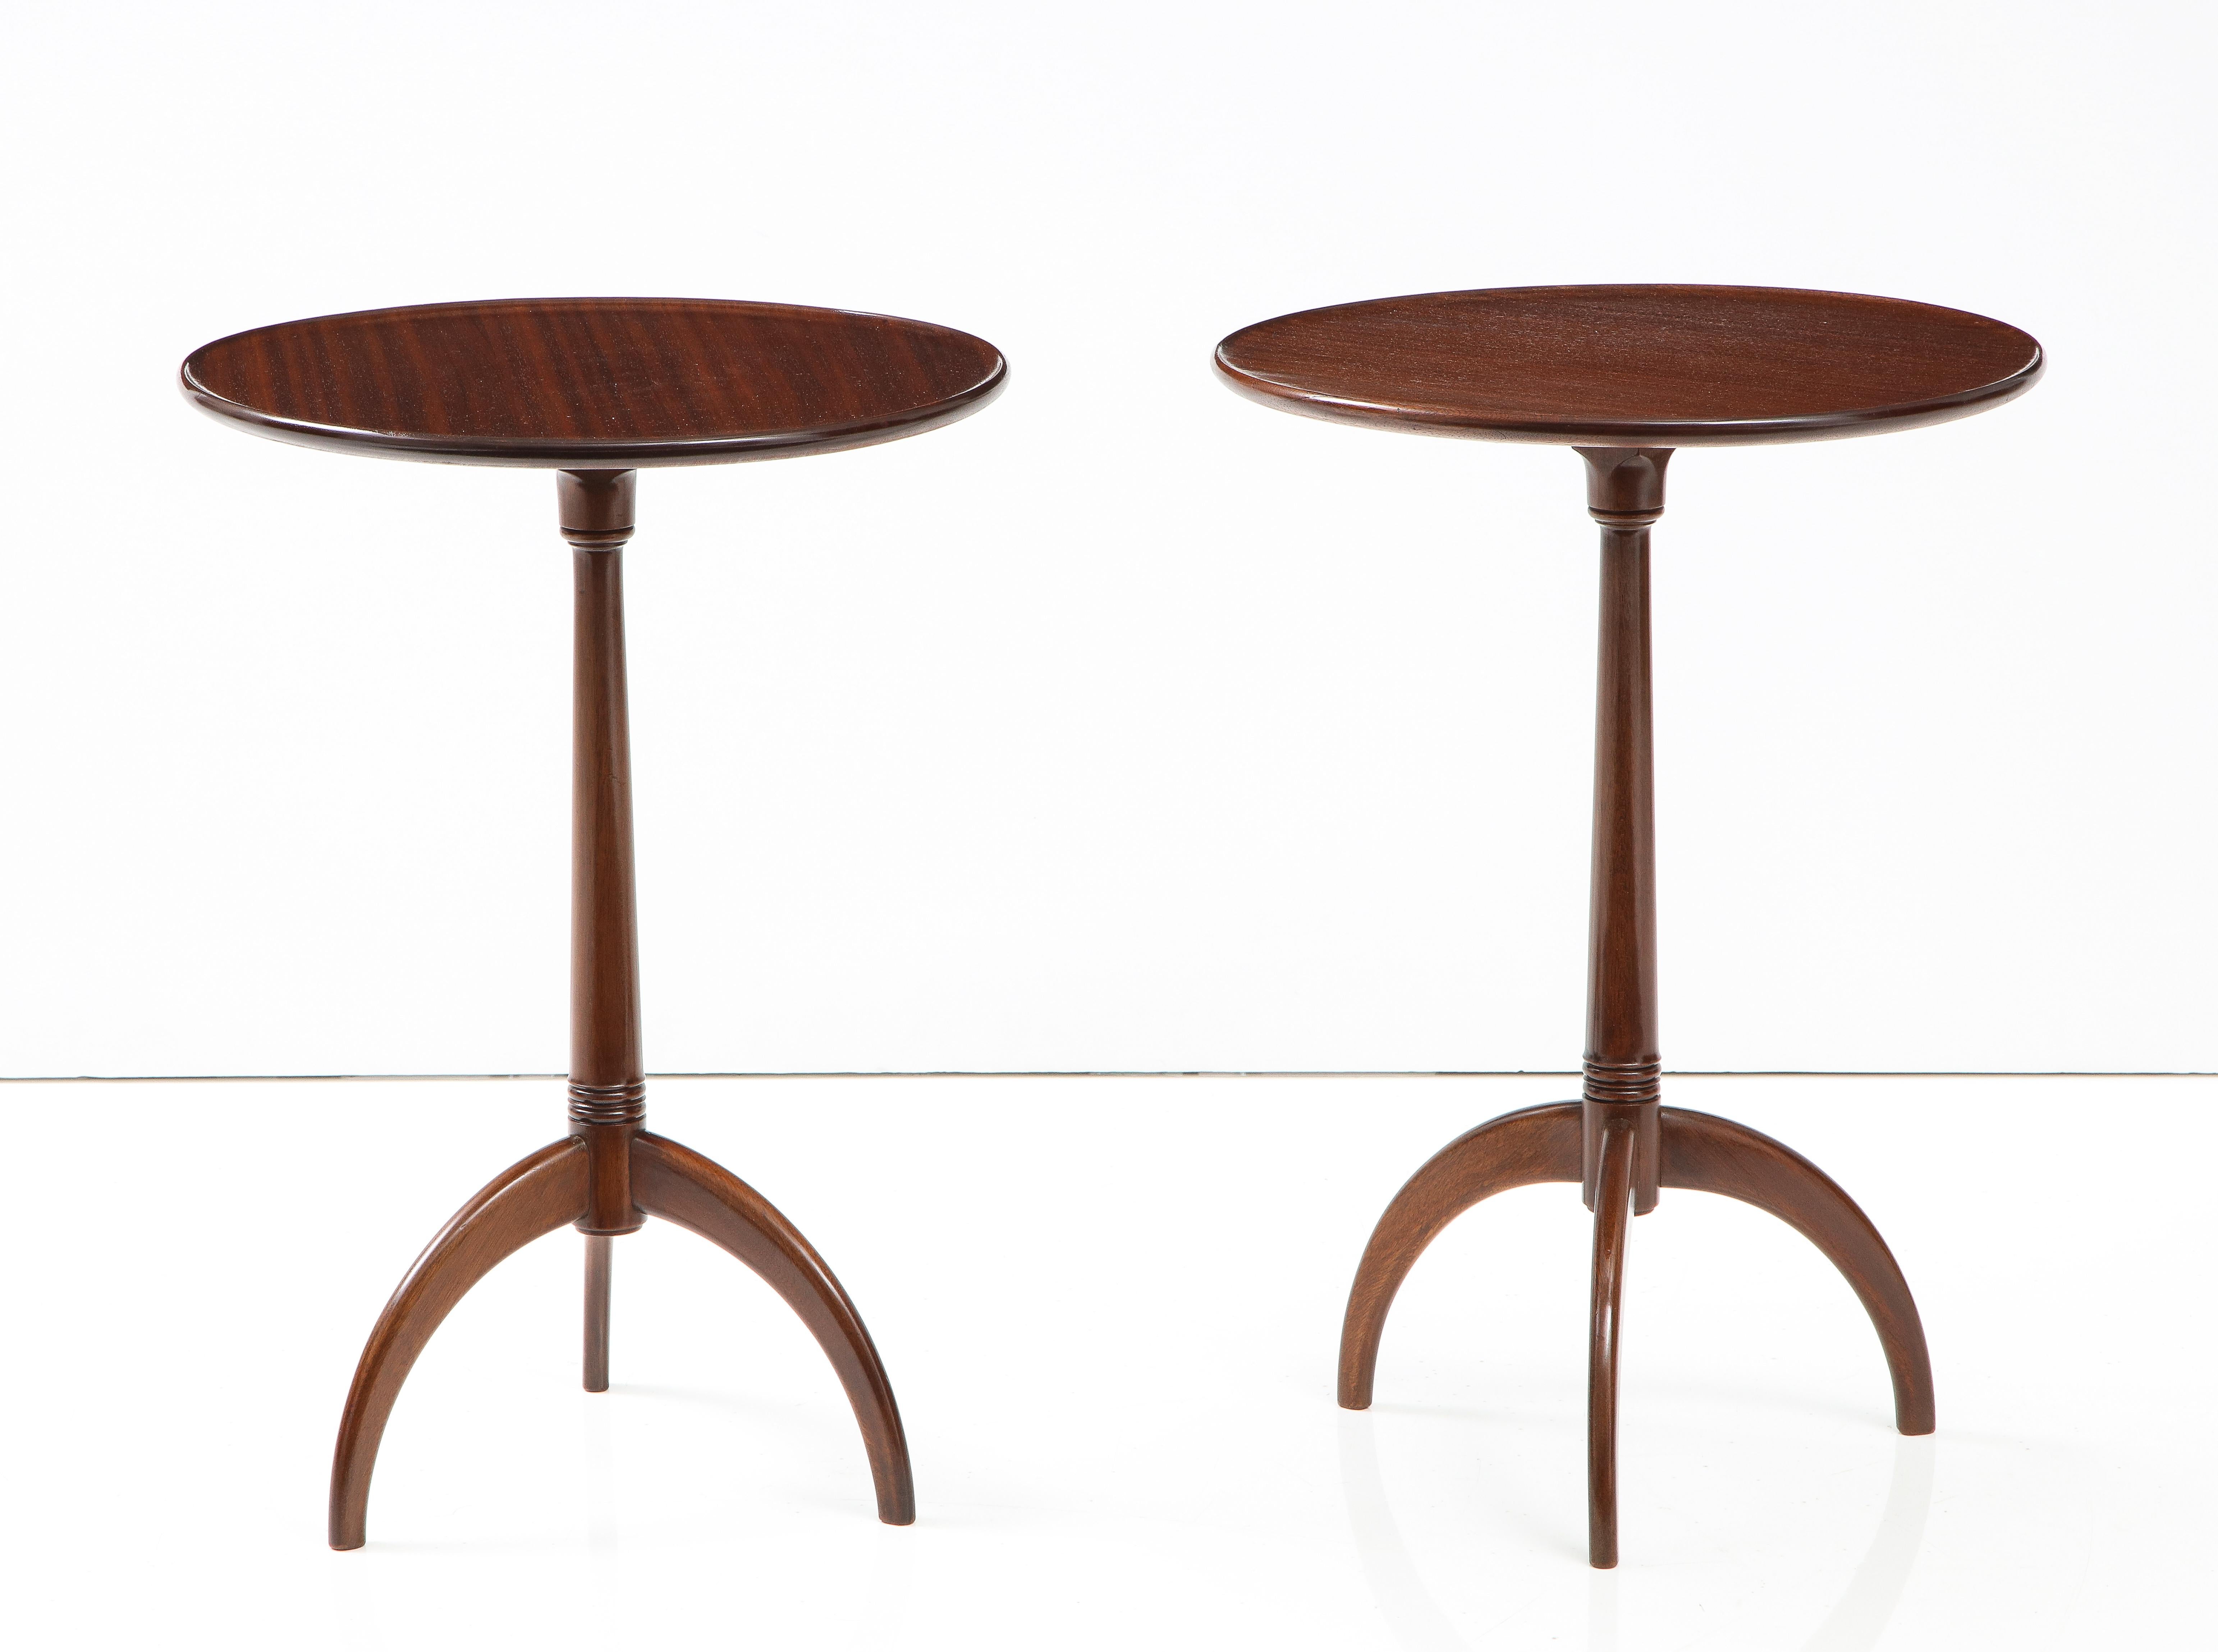 A pair of Danish mahogany side tables, Circa 1940s, by Frits Henningsen, each with a solid circular dished top raised on a turned spreading stem ending with three down curved legs. This is a true pair of tables, the tops are cut from the same tree